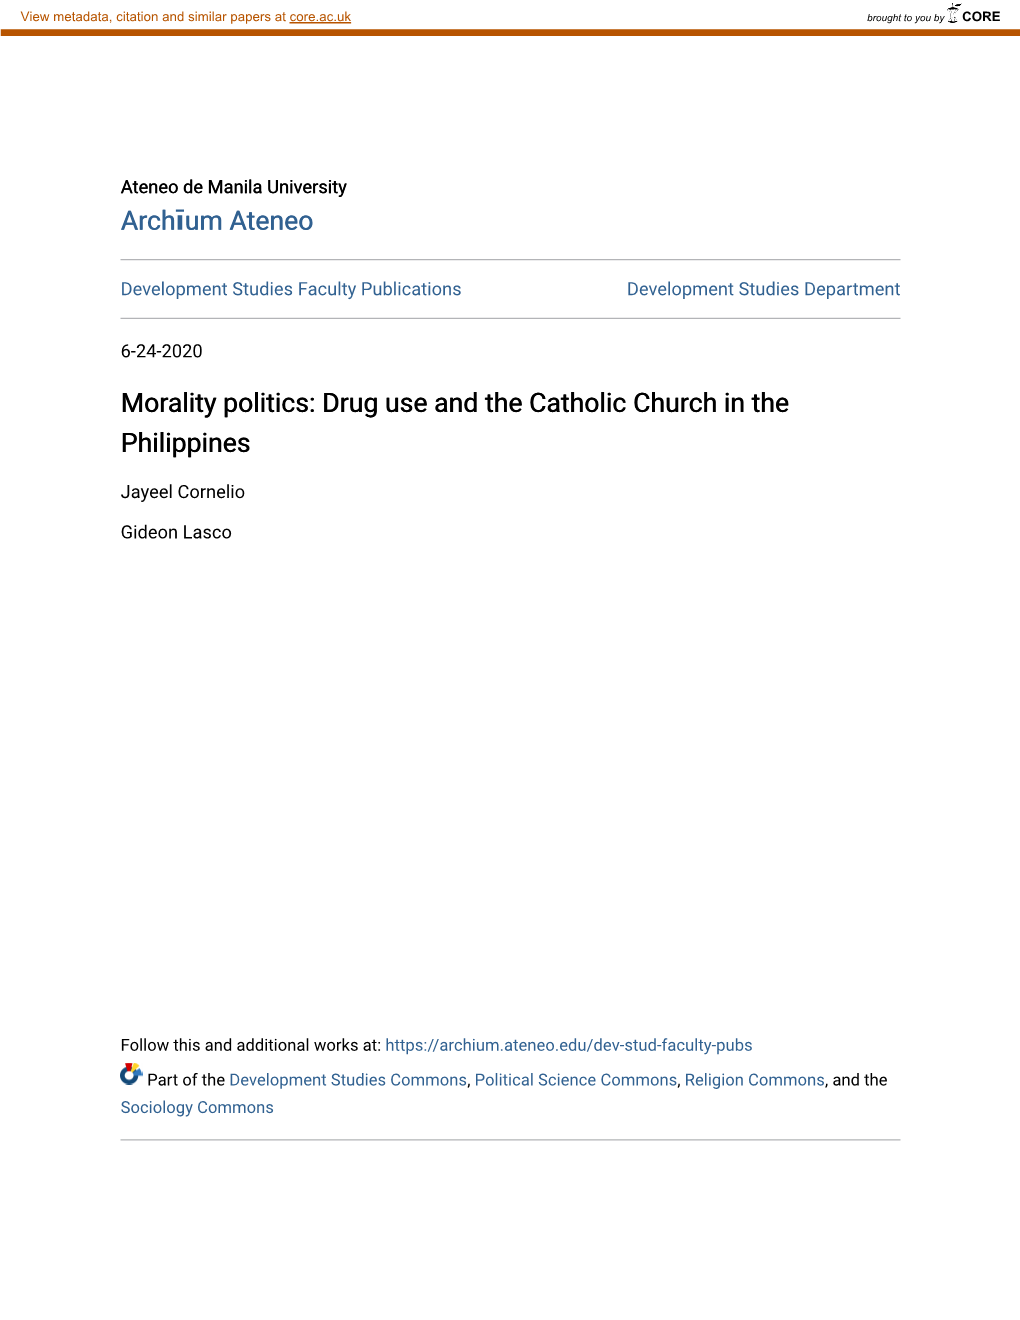 Morality Politics: Drug Use and the Catholic Church in the Philippines